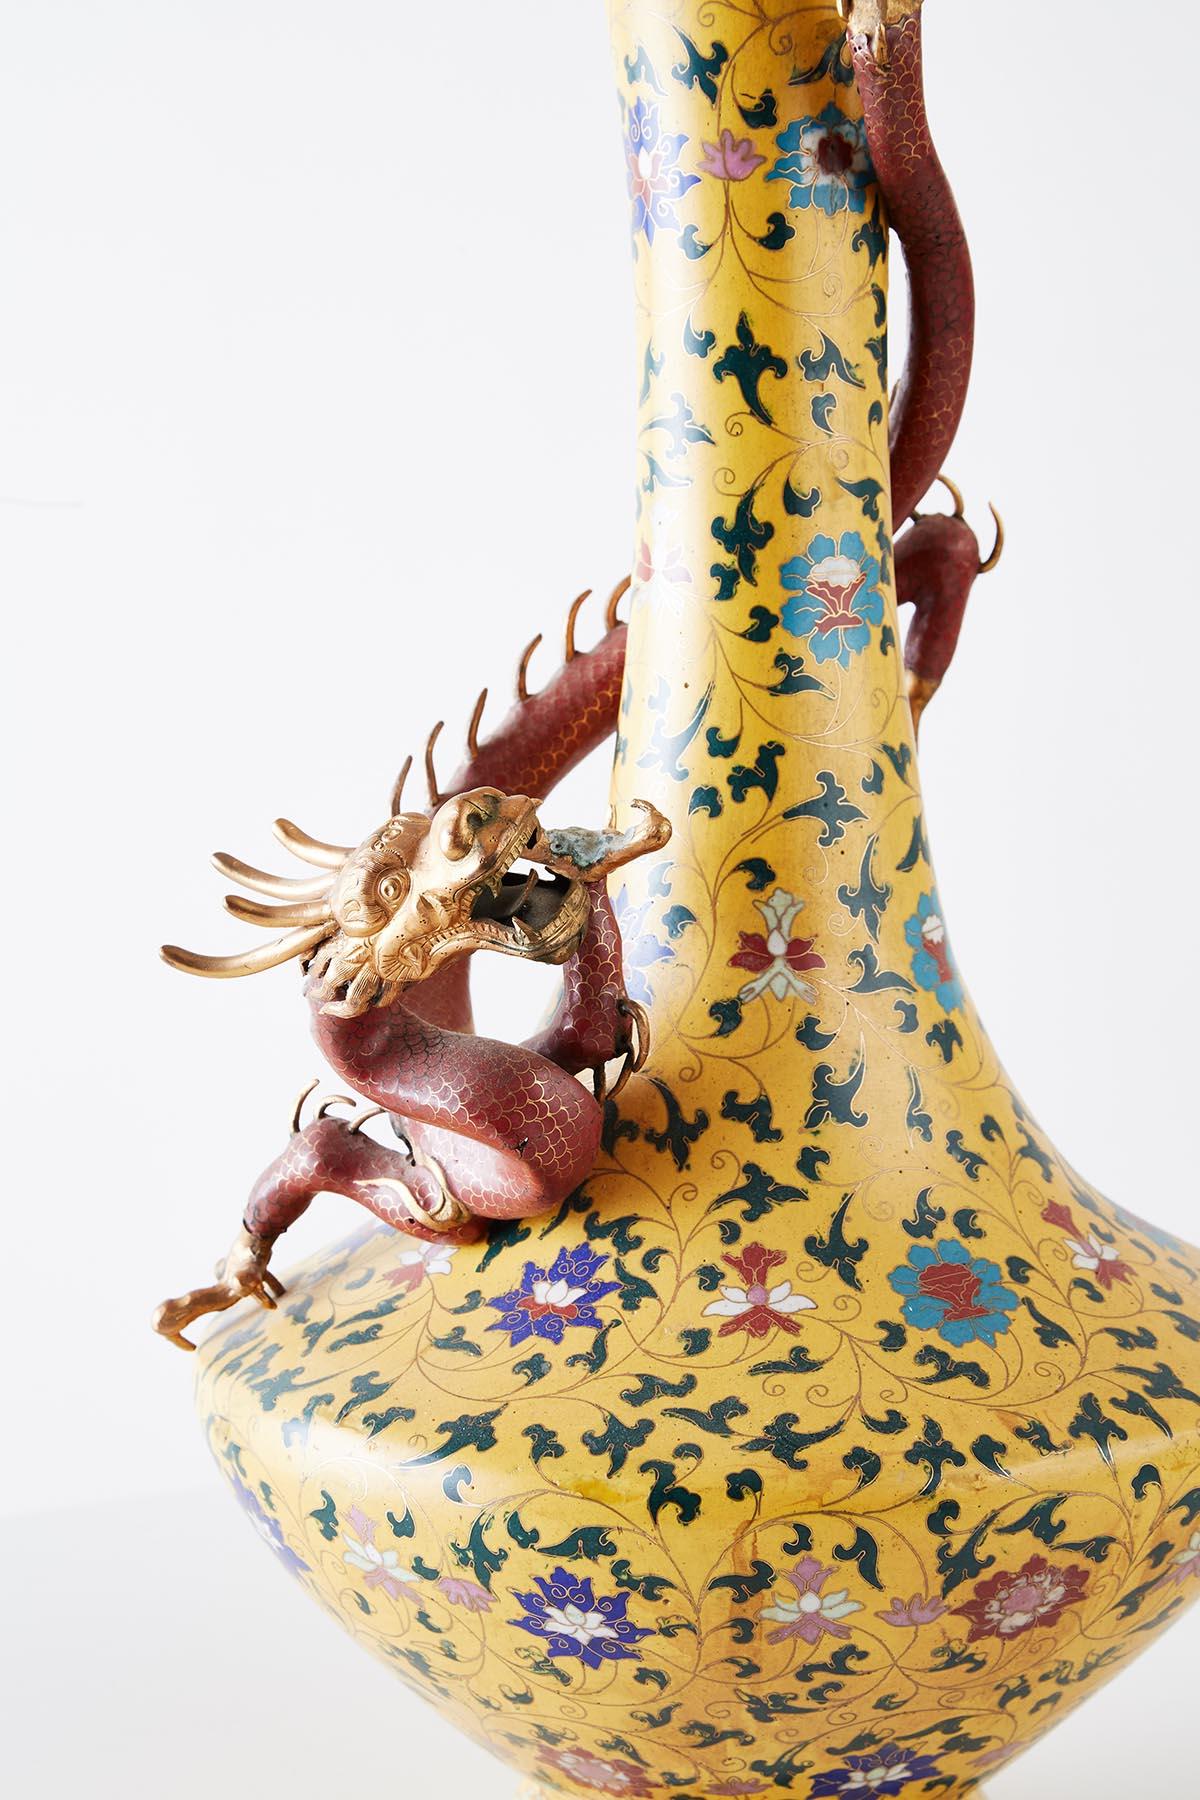 Cloissoné Pair of Chinese Cloisonné Dragon Mounted Yellow Vases